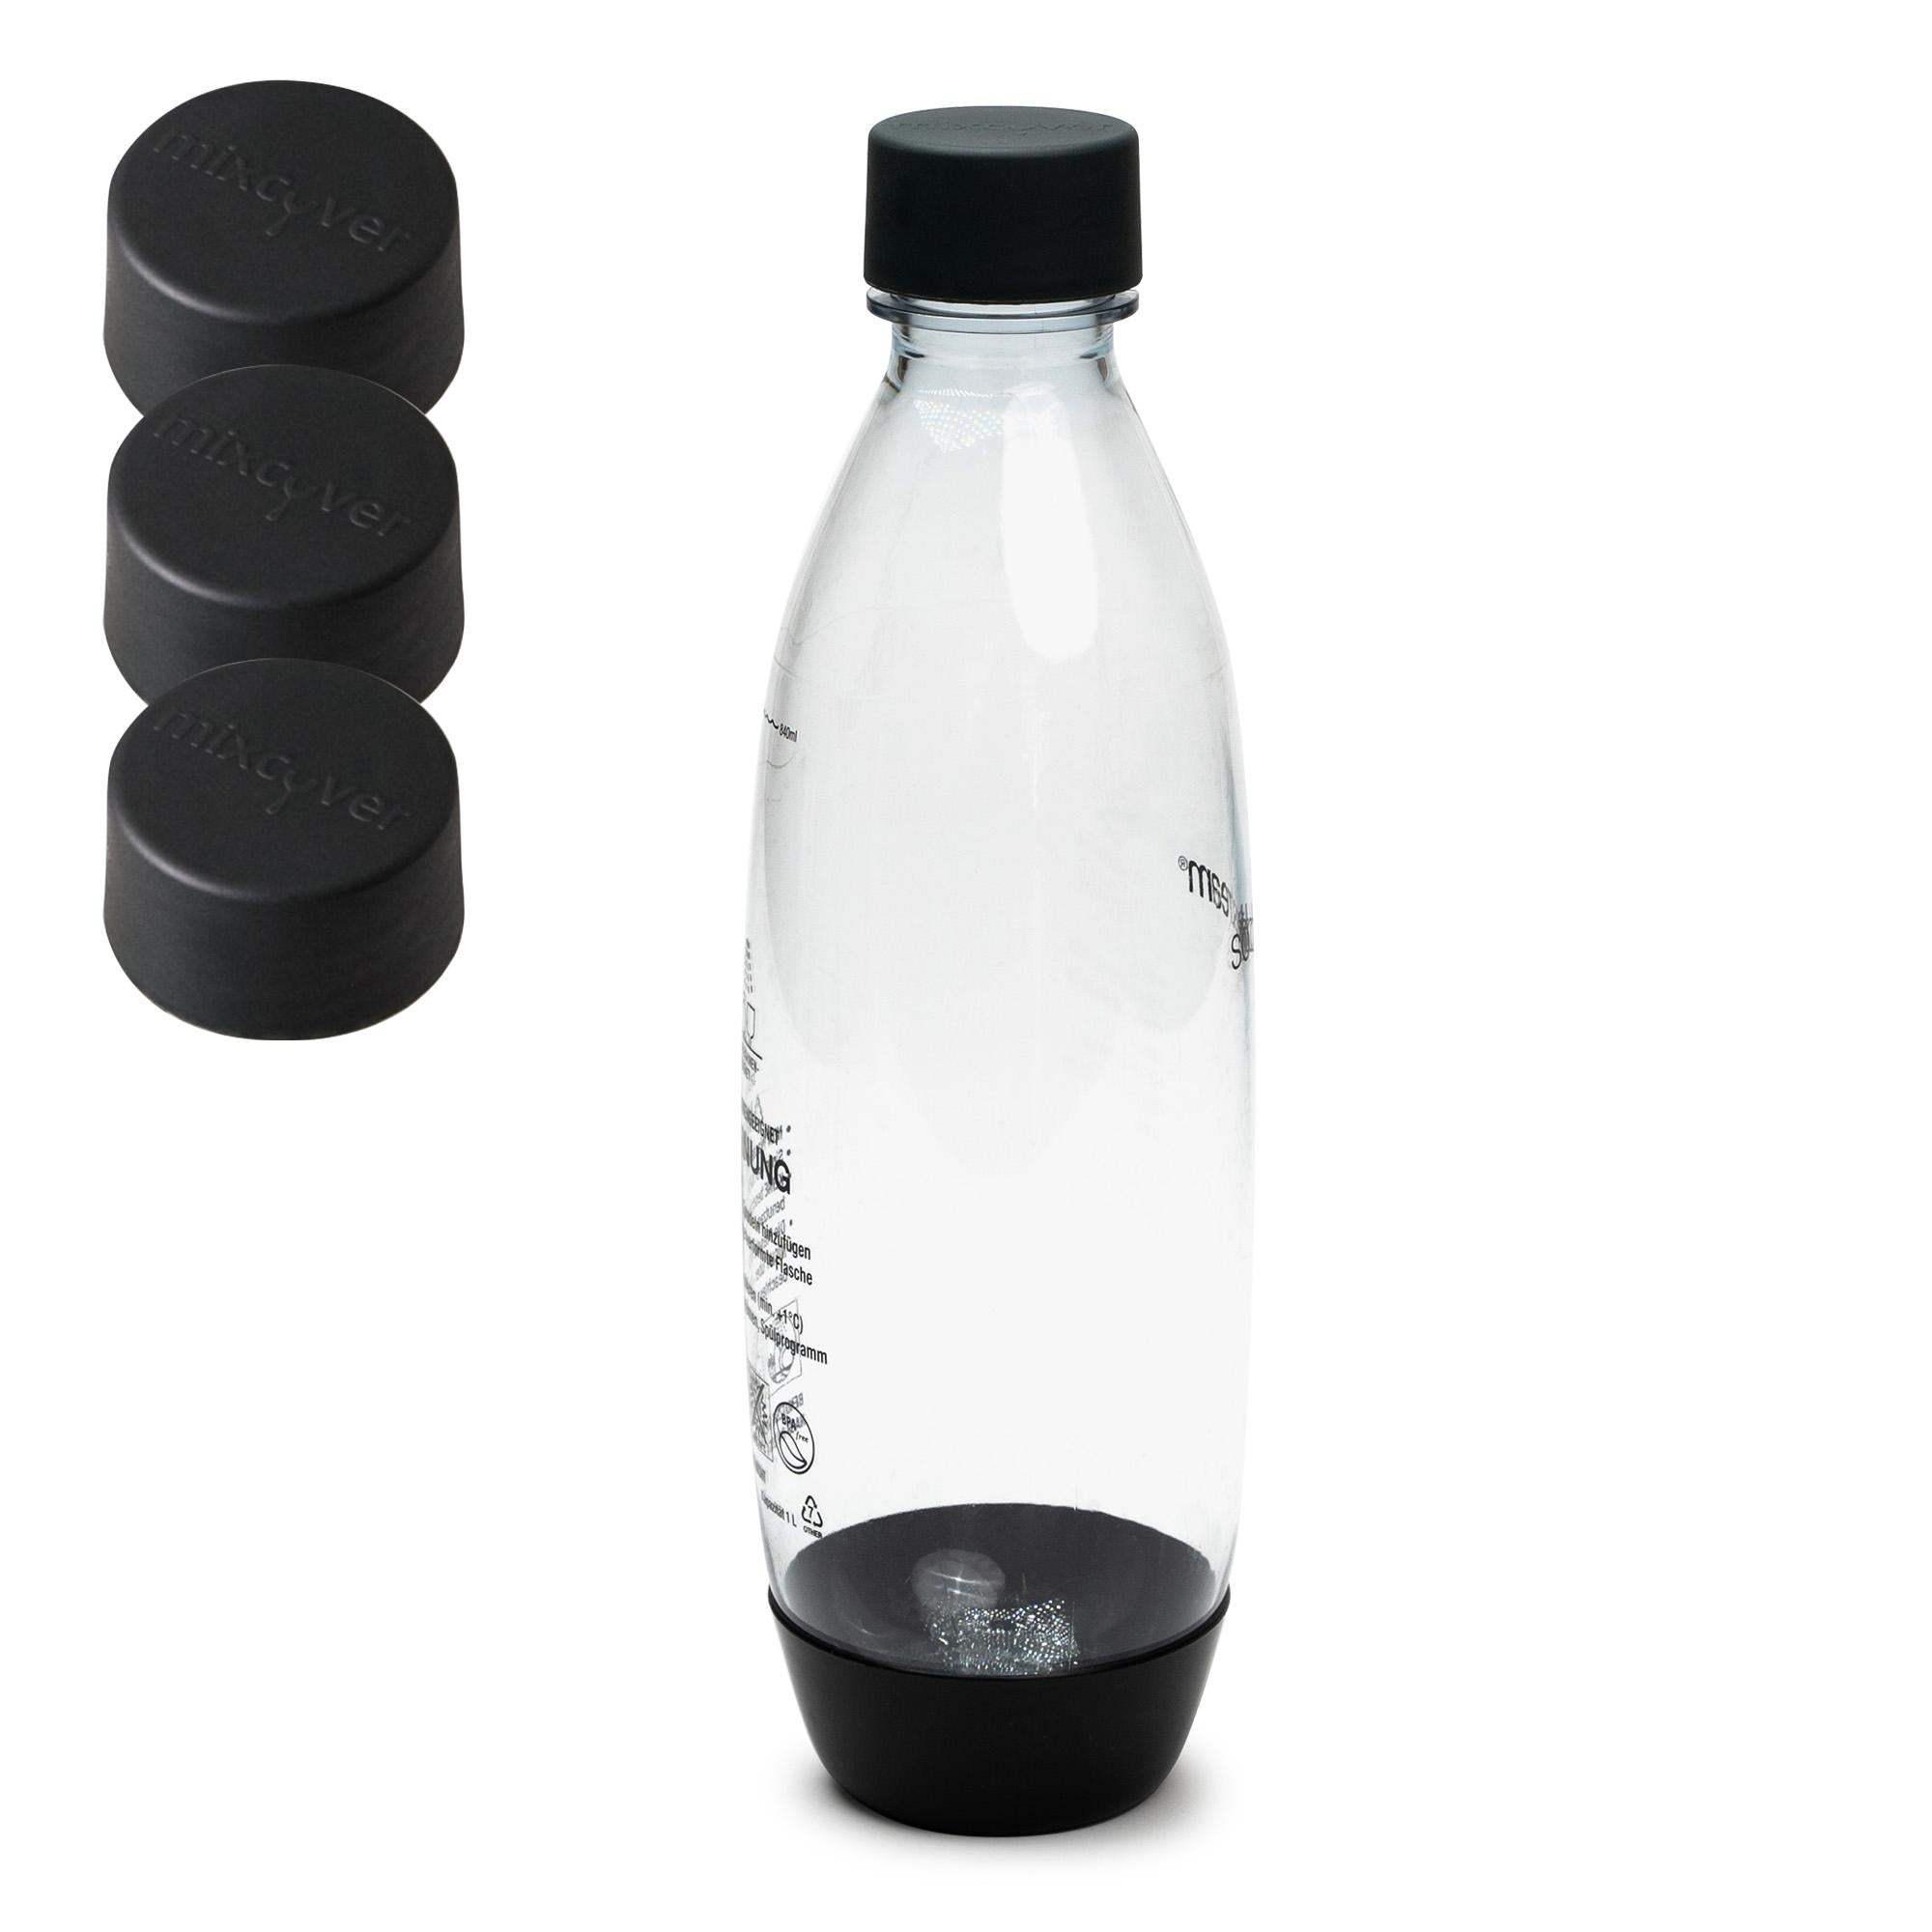 mixcover Replacement lid suitable for Sodastream PET plastic bottles 3 Set